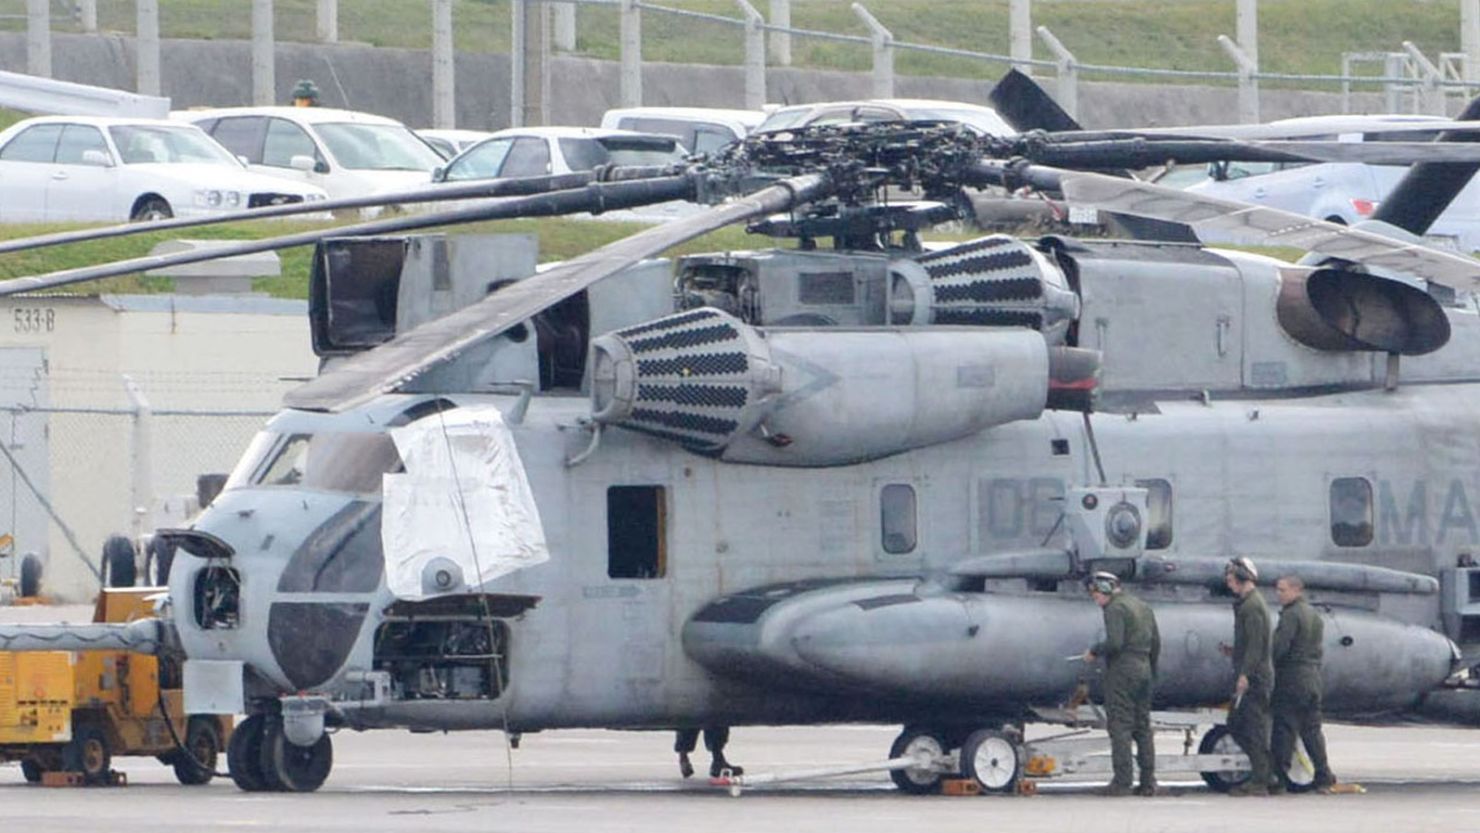 A US military CH-53E transport helicopter, with one of the windows (left) covered, is parked at the US Marine Corps Air Station Futenma in Ginowan, Okinawa, on December 13.